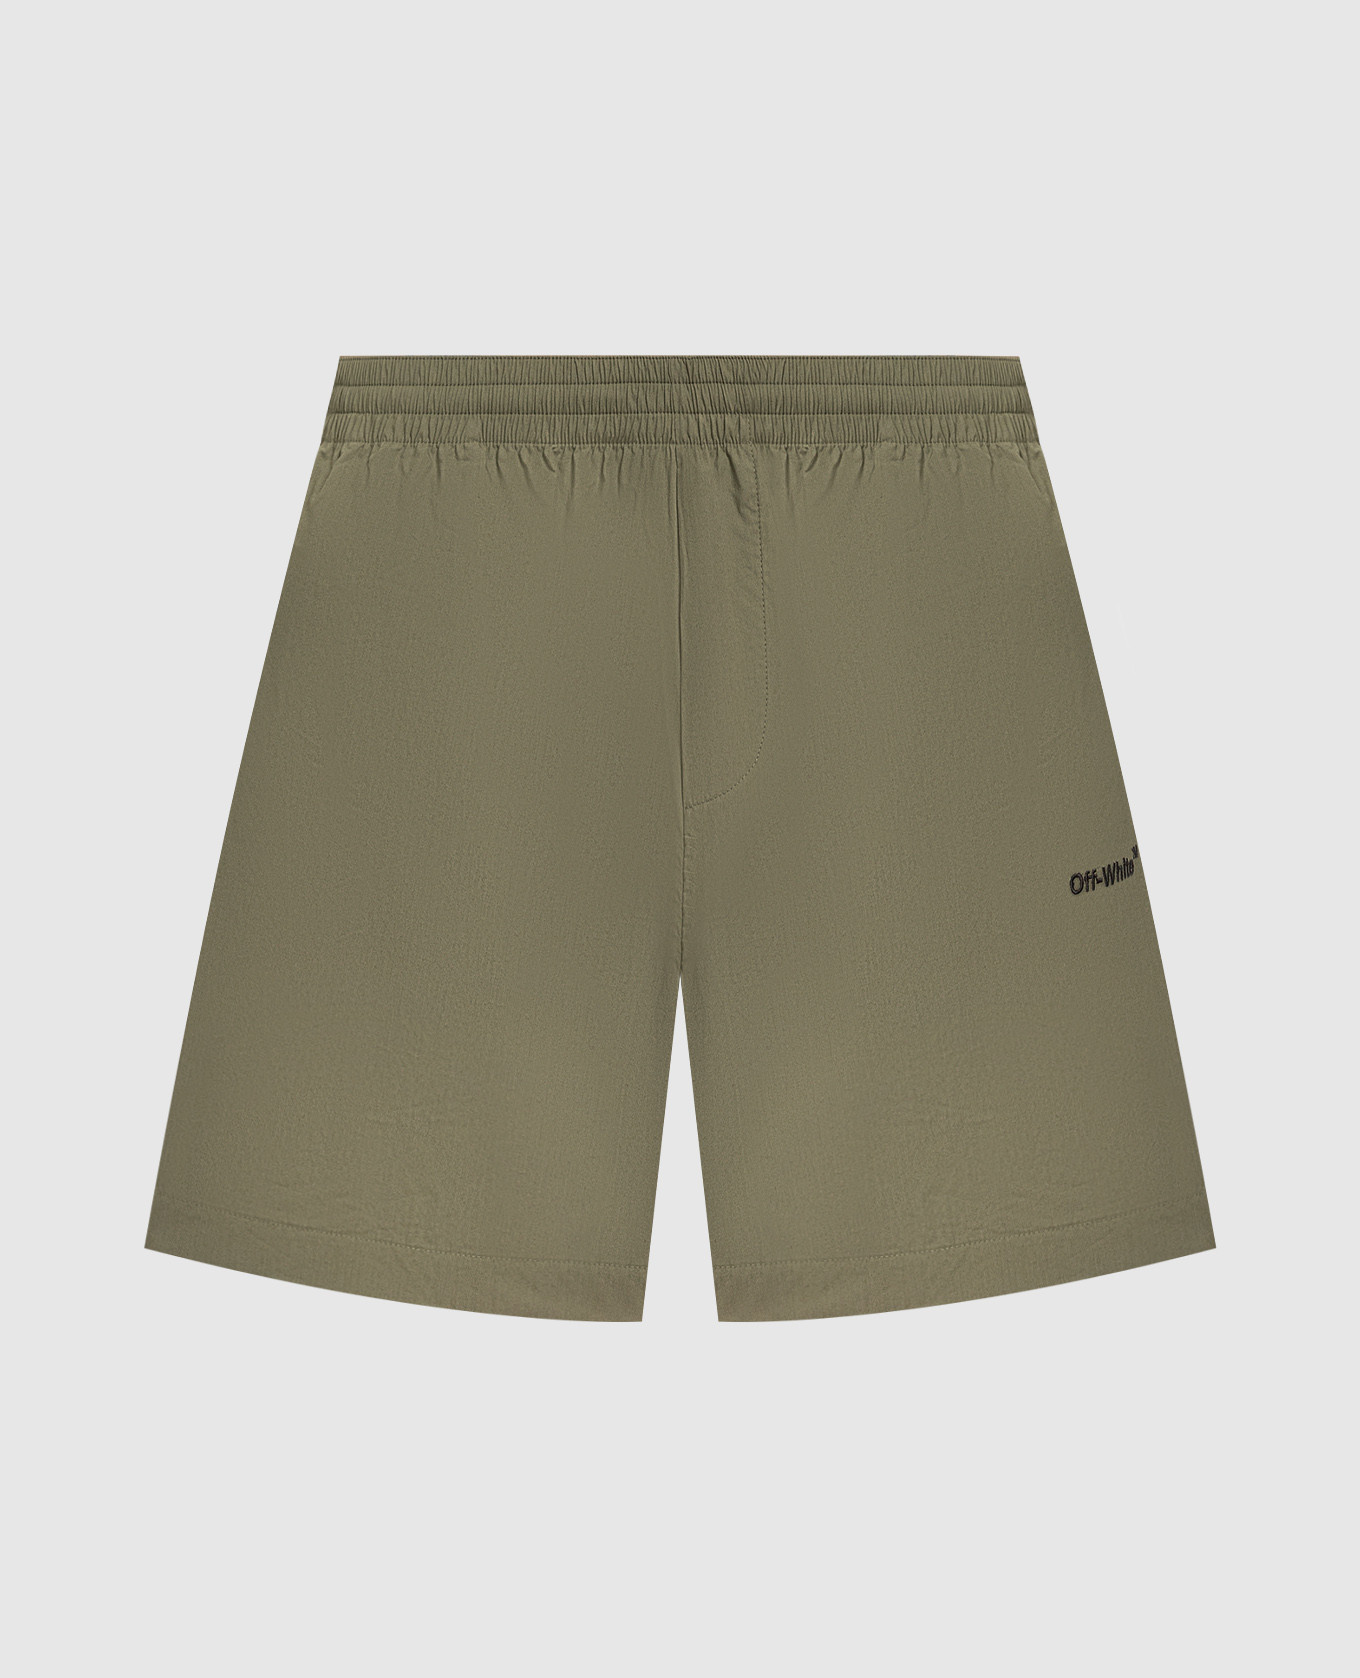 Green shorts with logo